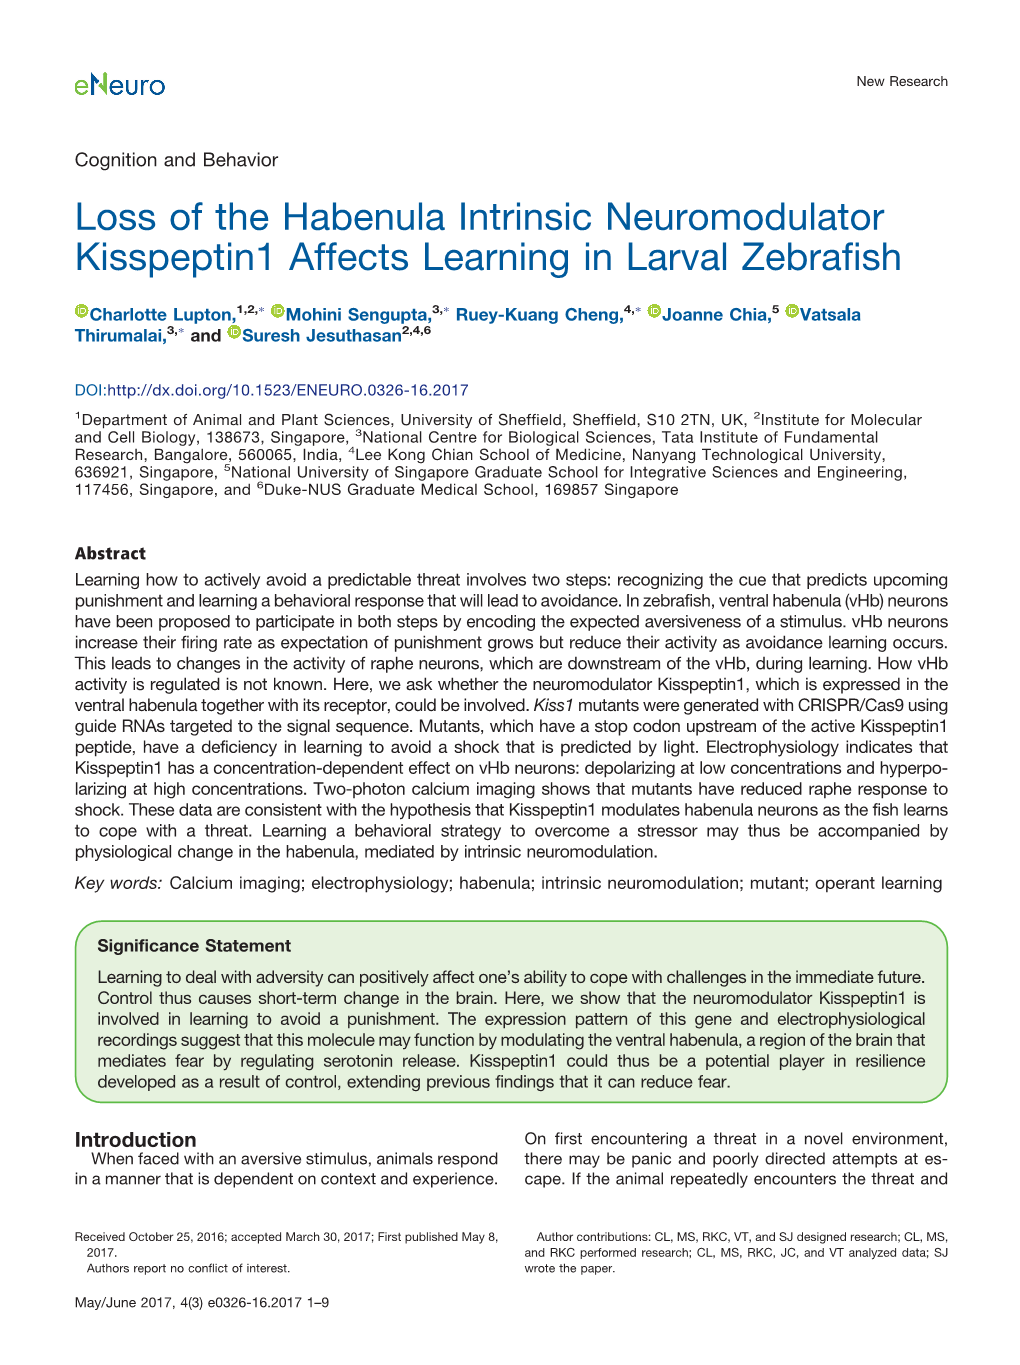 Loss of the Habenula Intrinsic Neuromodulator Kisspeptin1 Affects Learning in Larval Zebrafish